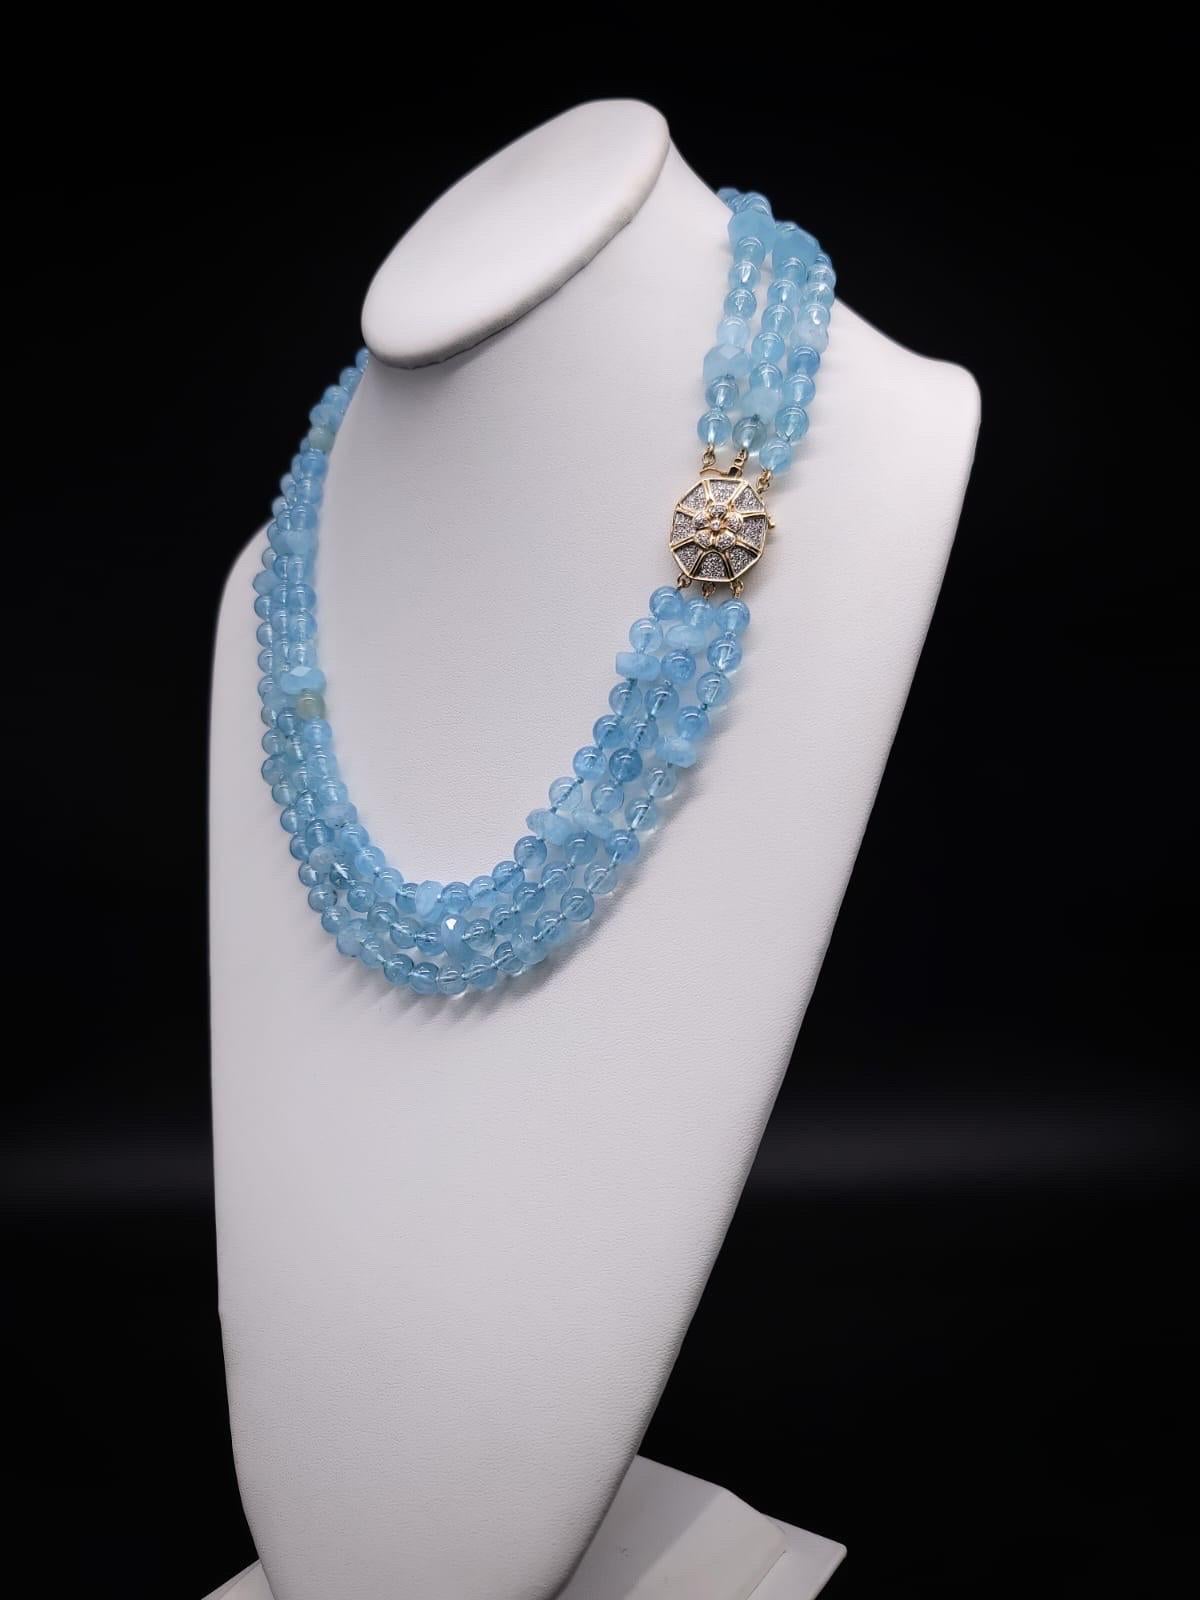 A.Jeschel AAA Aquamarine necklace with a 14k Gold Diamond clasp. 5